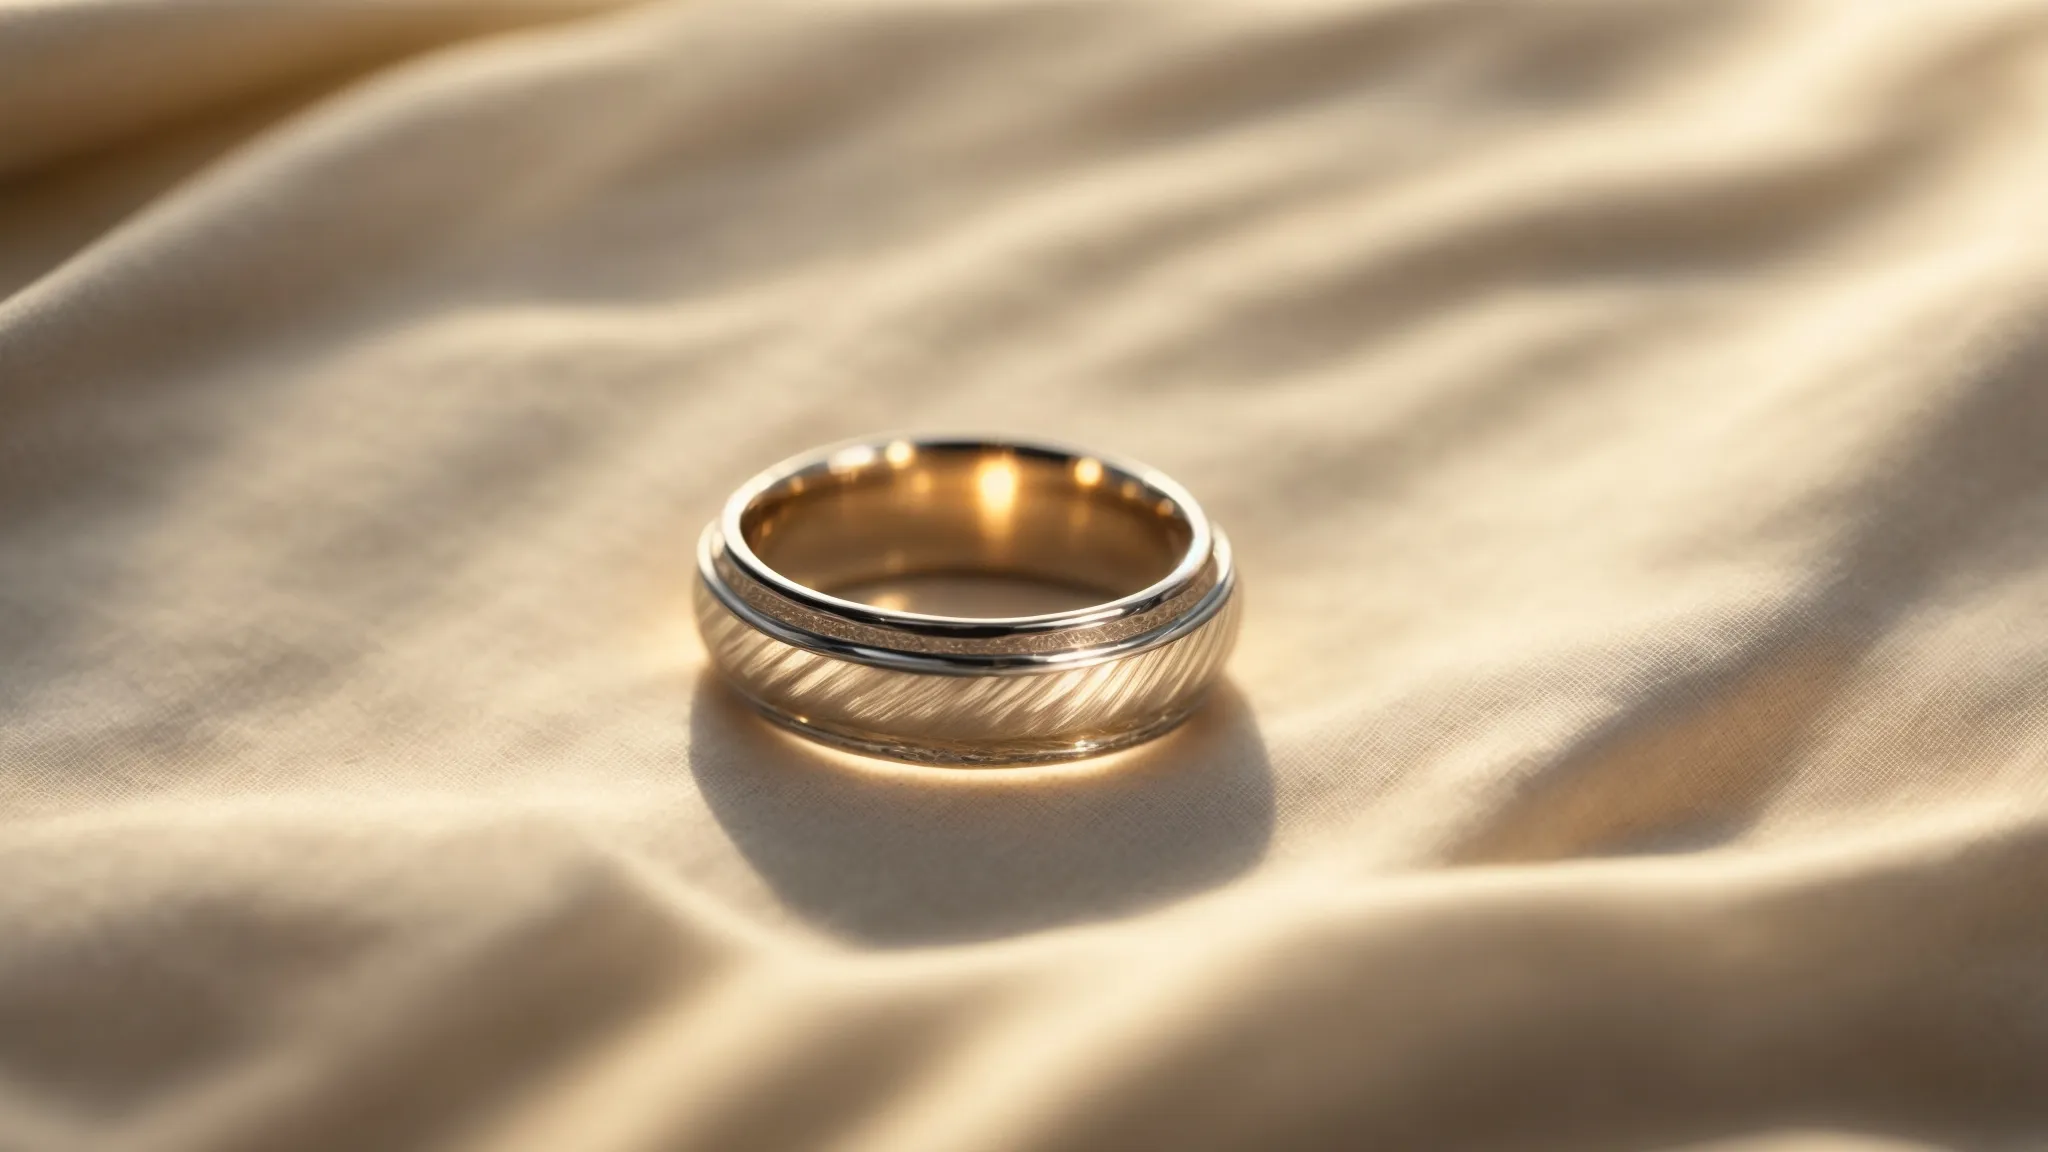 a platinum ring resting gently on a soft cloth, with faint scratches visible under the warm glow of soft lighting.